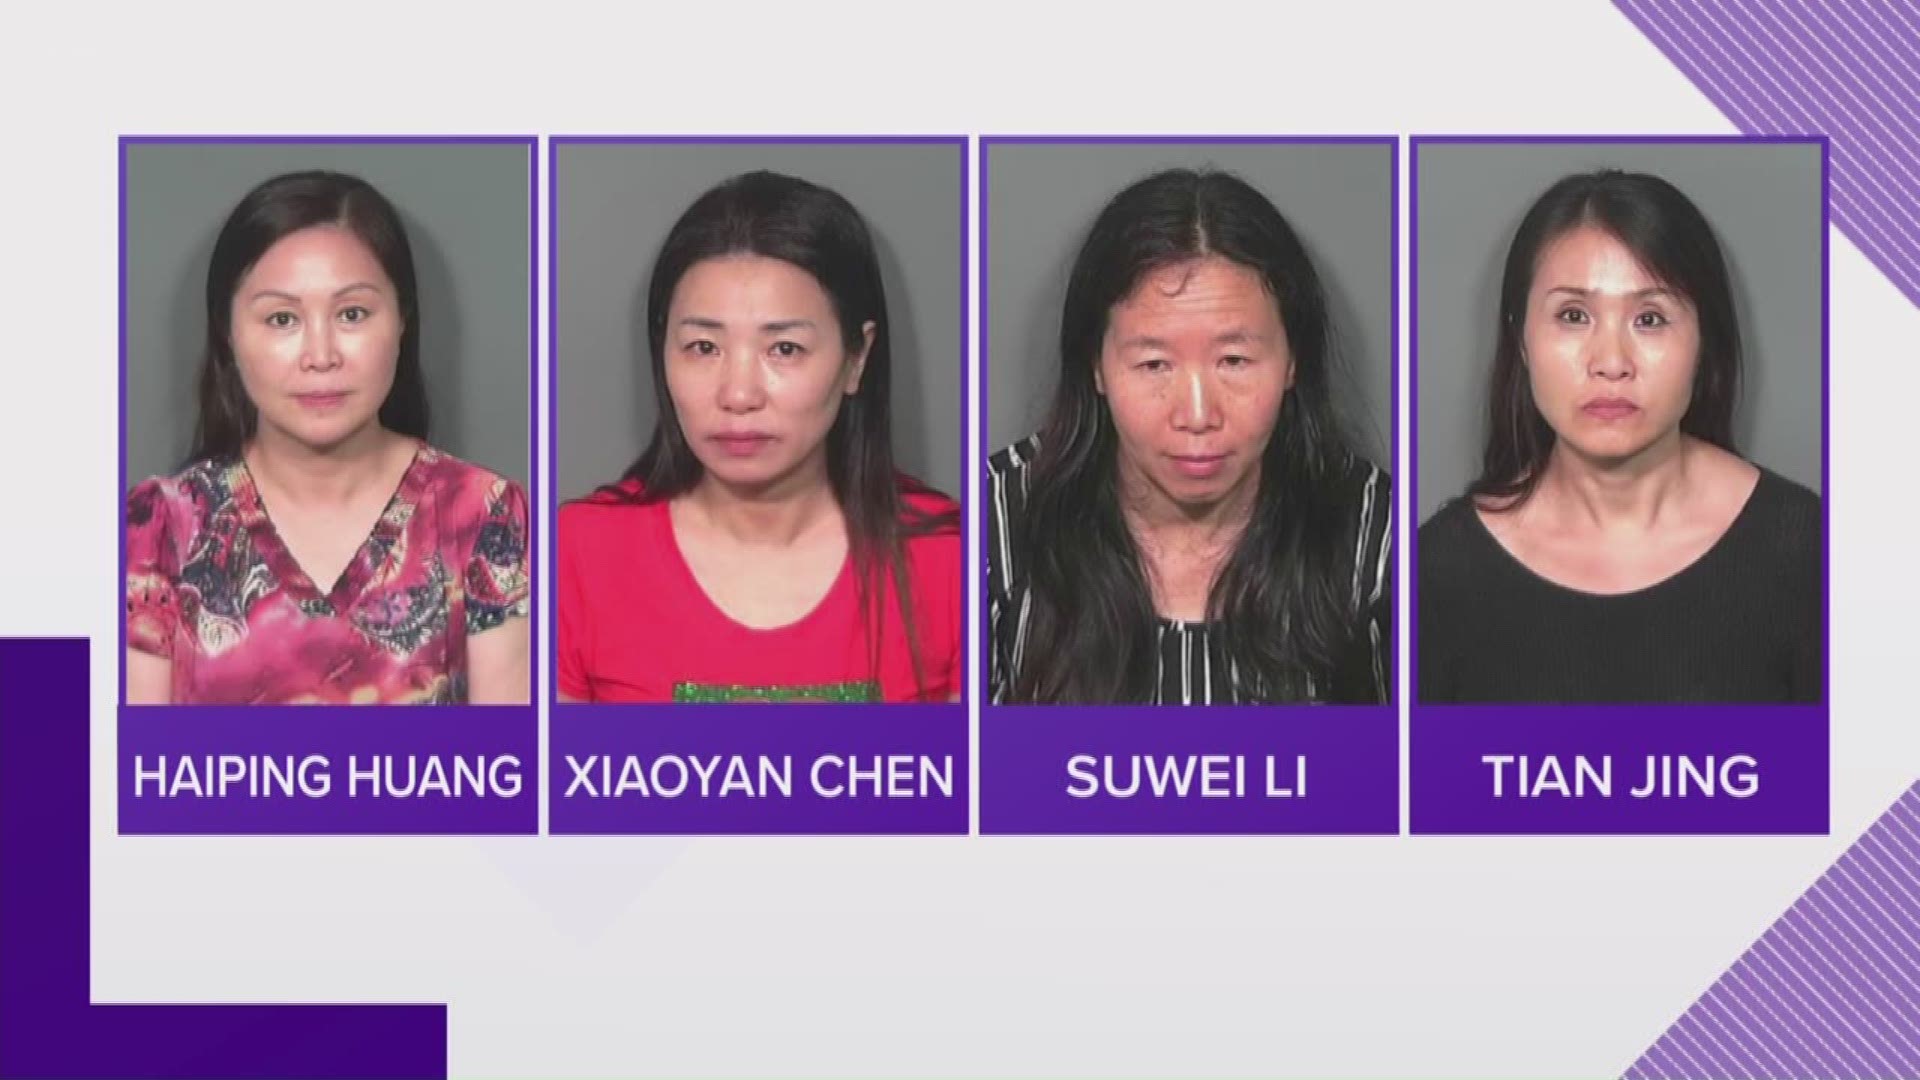 According to the Slidell Police department, four women were arrested after an undercover operation by police found that they were performing sexual favors for money at Slidell massage parlors.